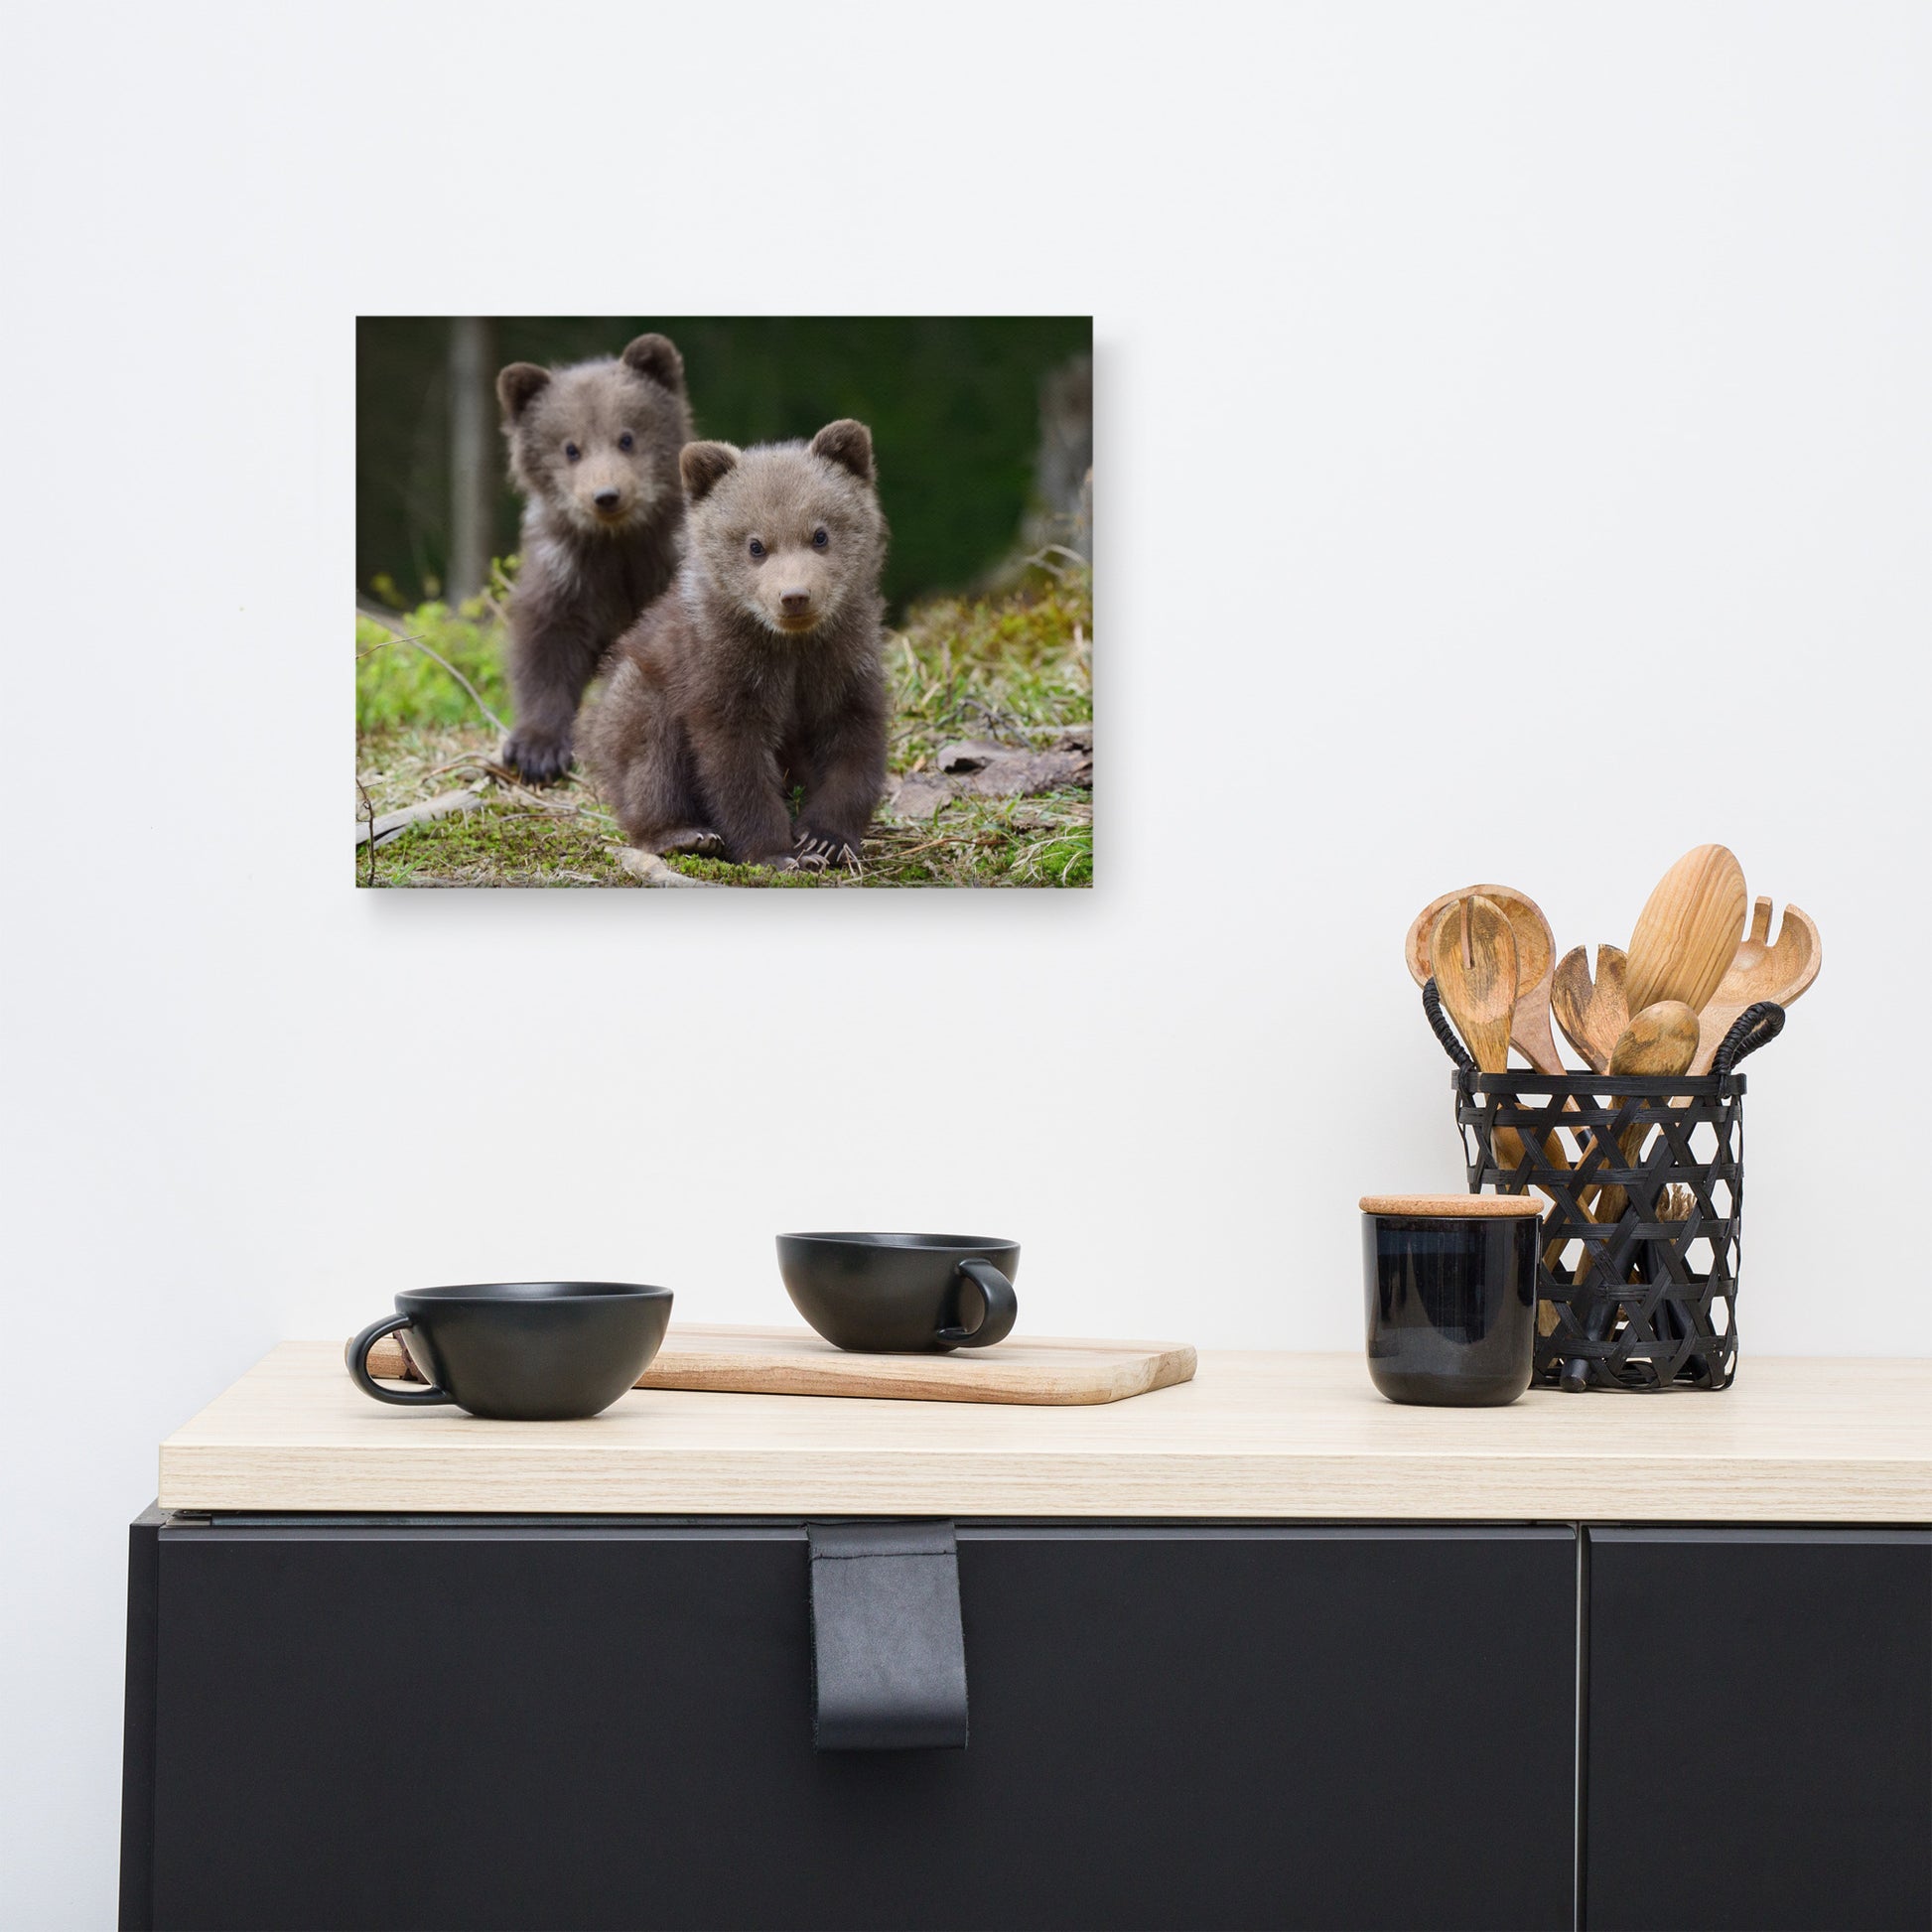 Nursery Wall Prints: Adorable Cubs In The Trees - Wildlife / Animal / Nature Photograph Canvas Wall Art Print - Artwork